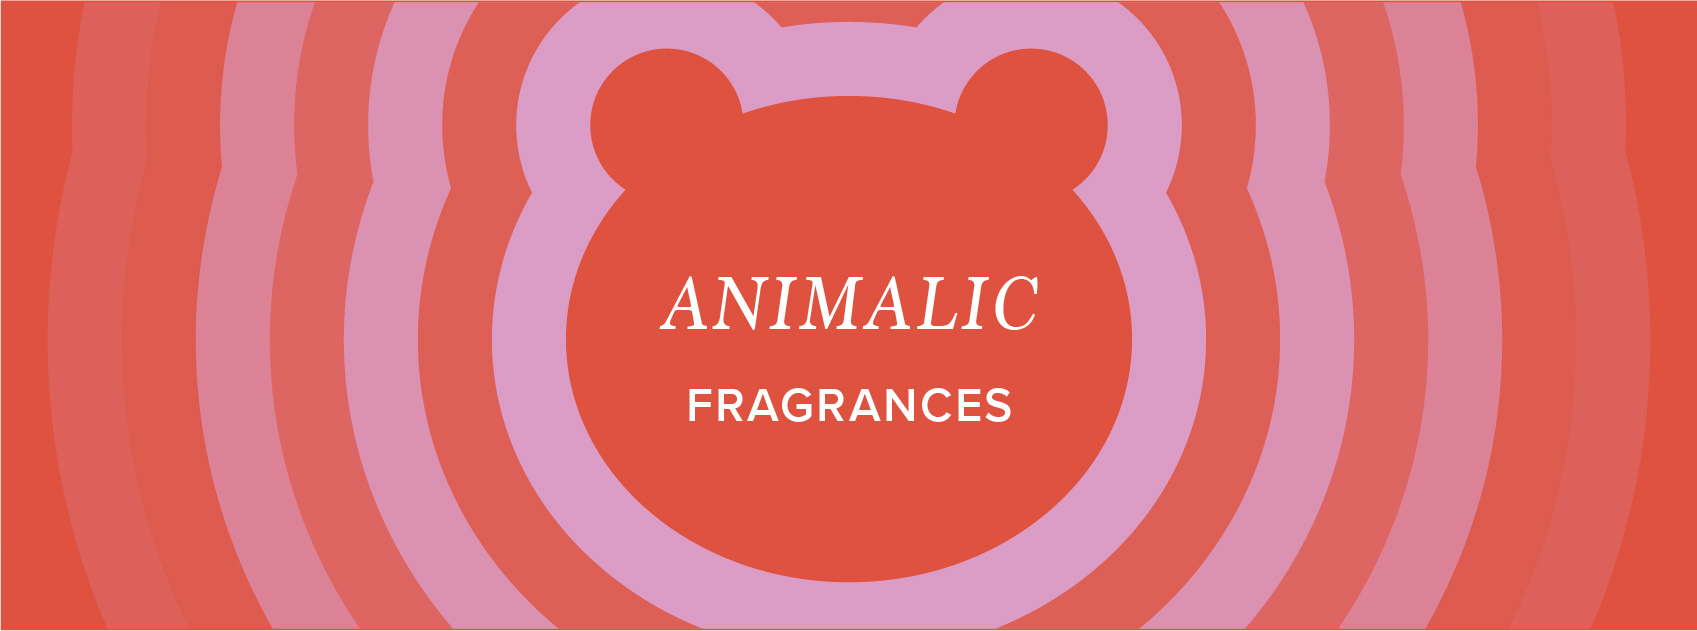 title animalic fragrances in red and pink bears